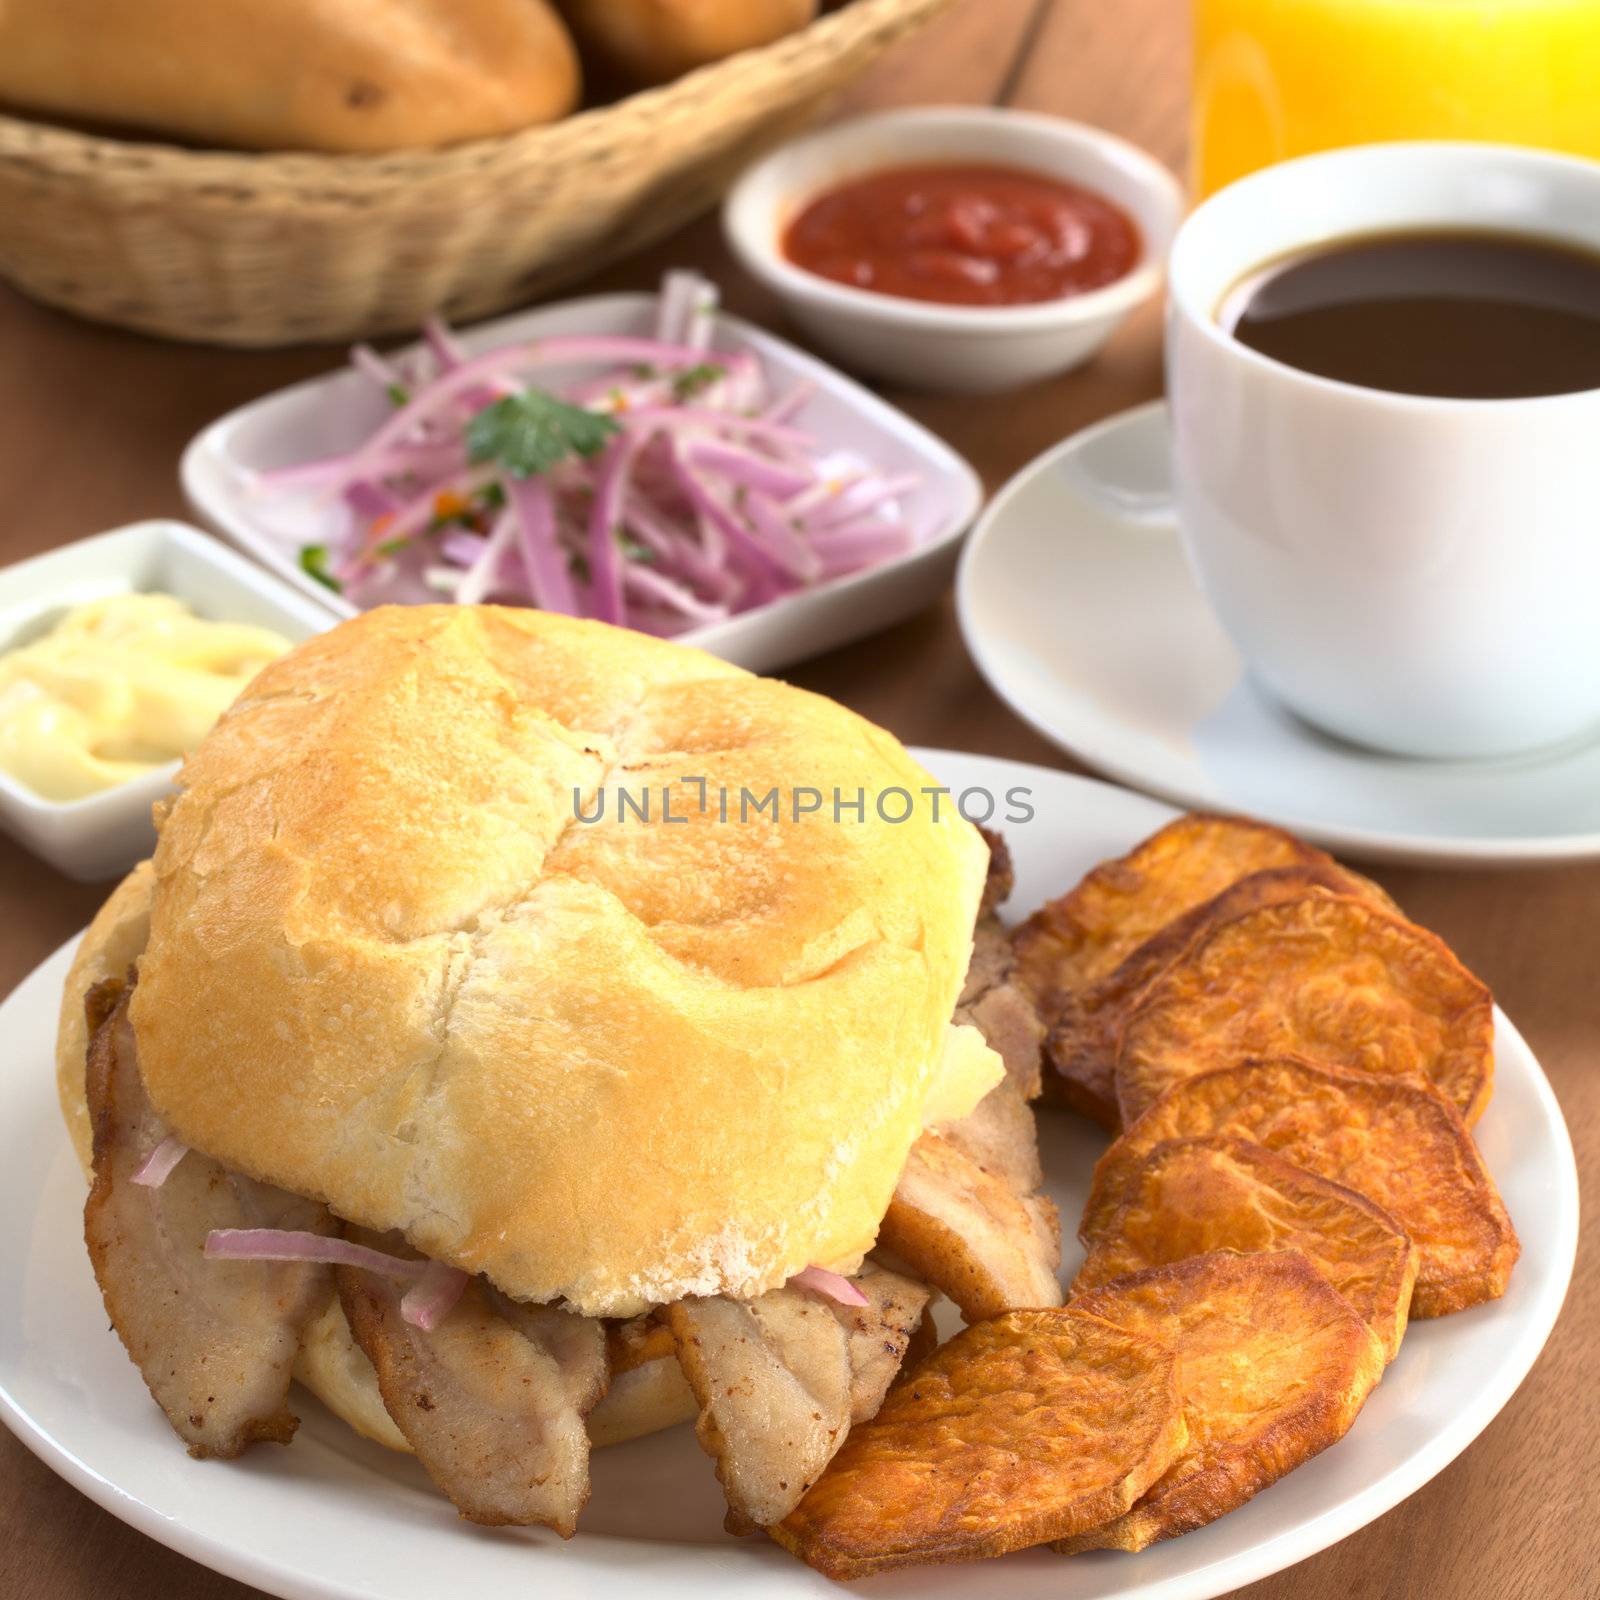 Typical Peruvian breakfast consisting of Pan con Chicharron (Bun with fried meat) and fried sweet potato, salsa criolla (onion salad), ketchup, mayonnaise, with coffee, orange juice and buns (Selective Focus, Focus on the front of the bun and the meat)